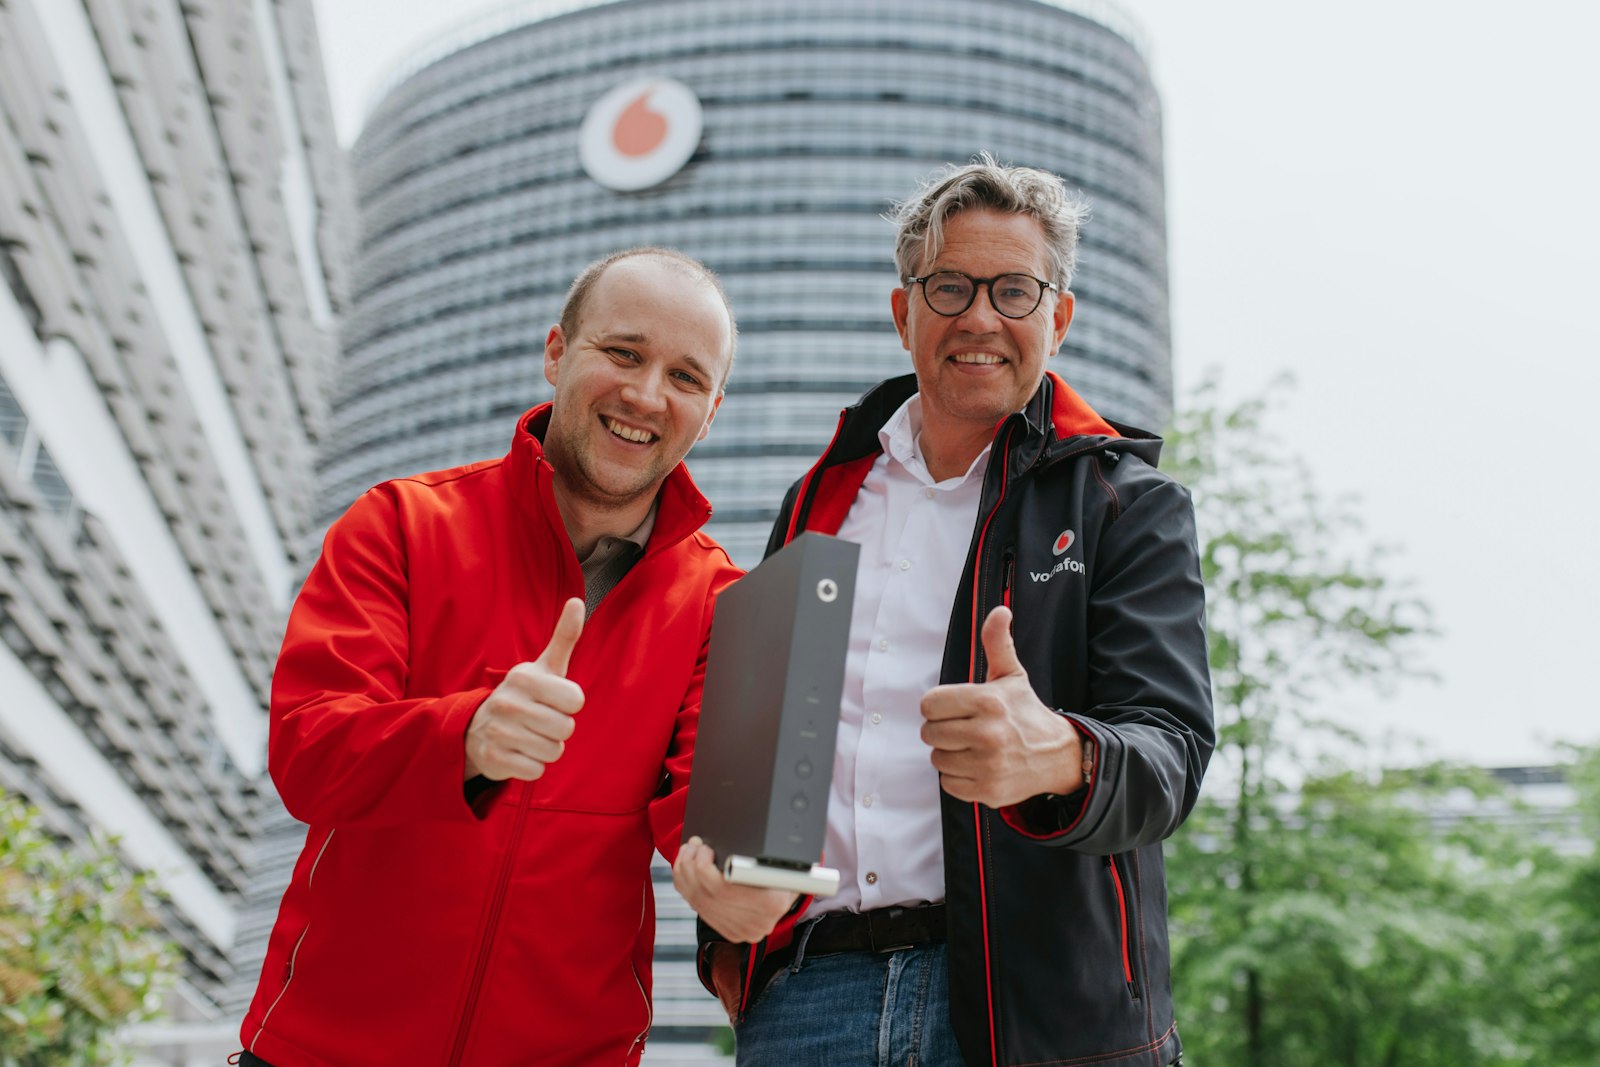 Vodafone Germany secures first place in the CHIP fixed broadband network test  